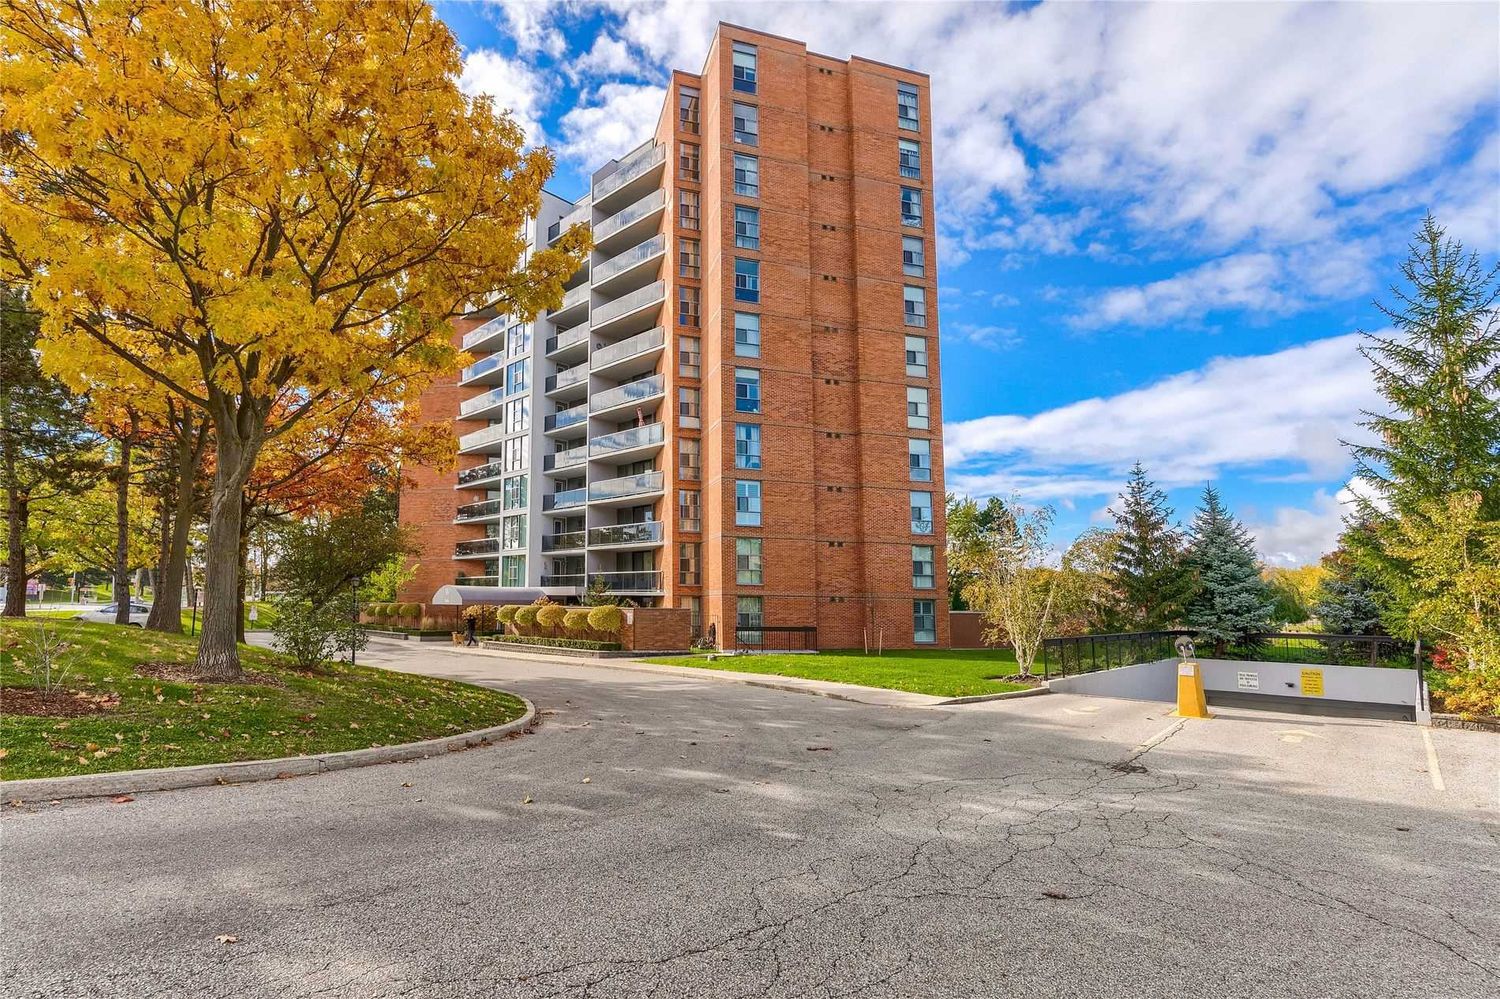 2665 Windwood Drive. Windwood Green Condos is located in  Mississauga, Toronto - image #1 of 3